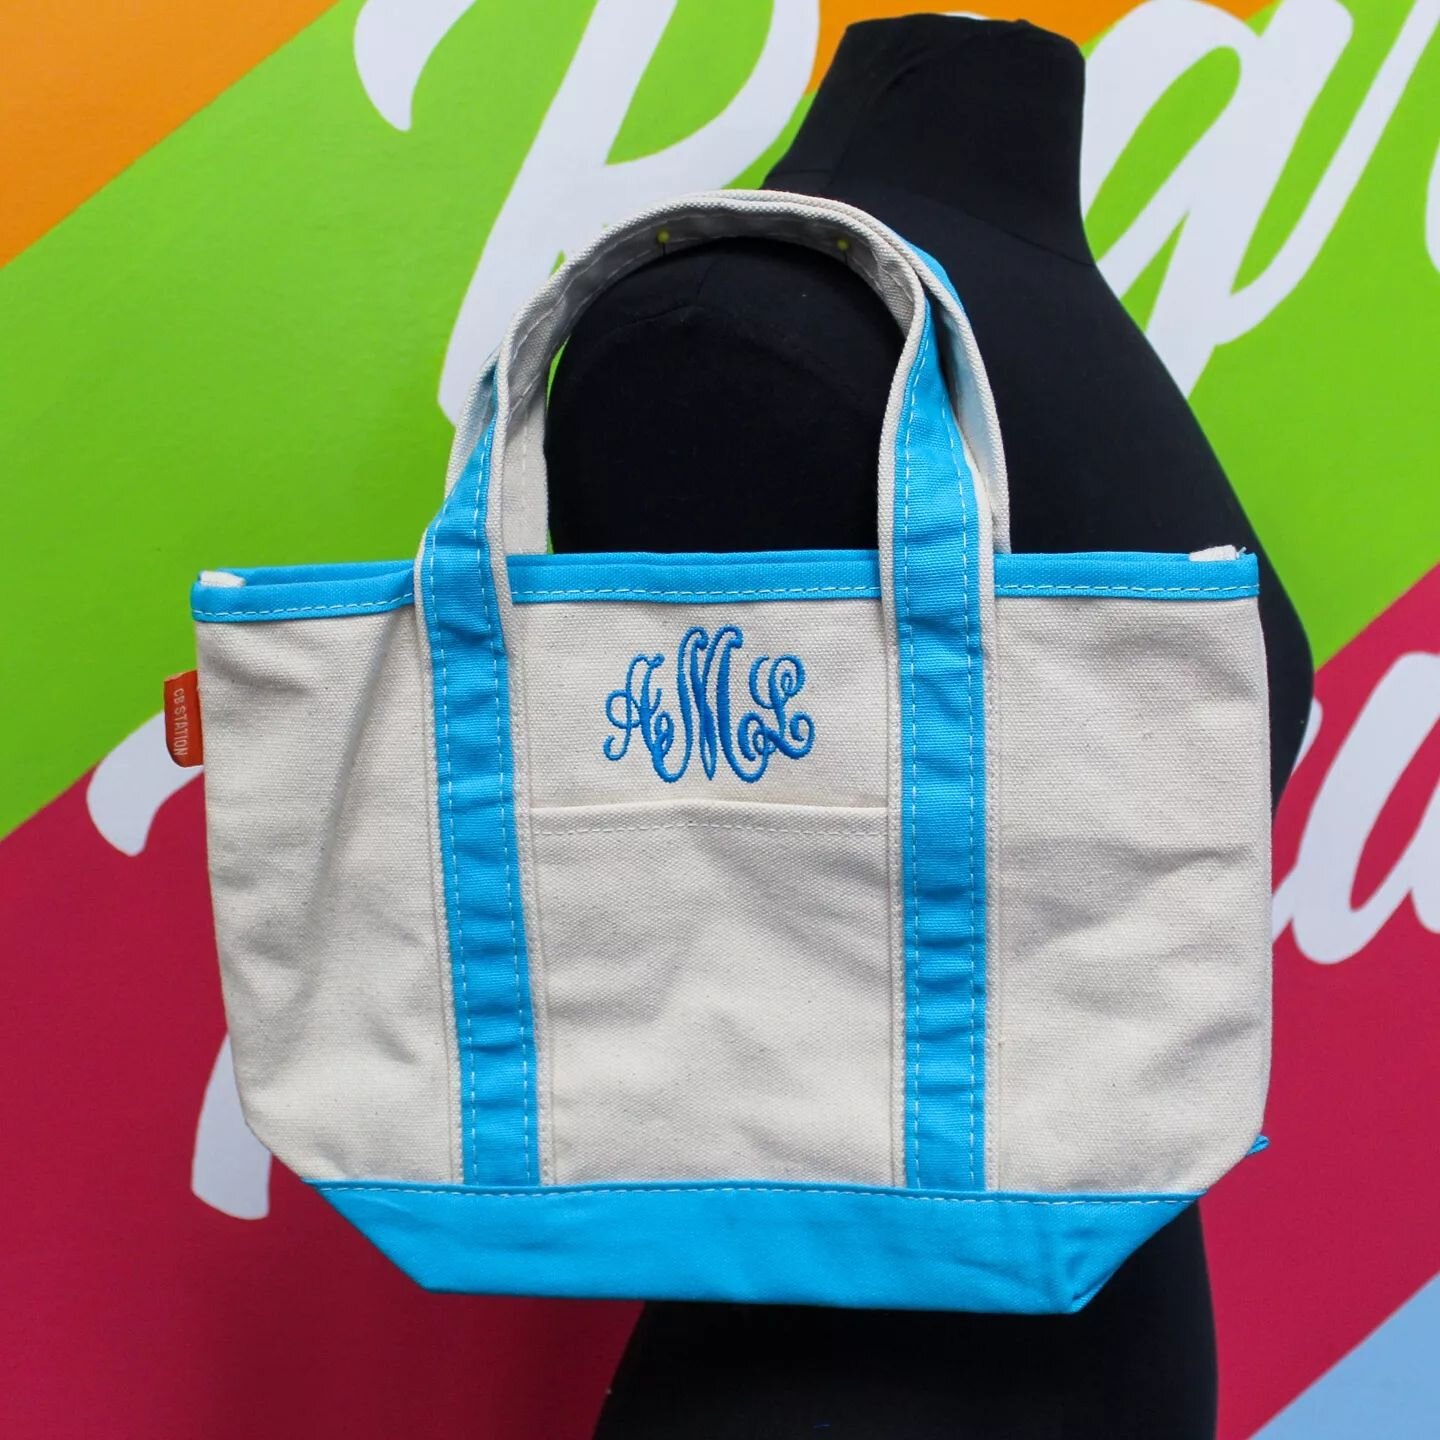 We have a wonderful selection of totes available in over 15 colors, 3 different sizes, and they're all perfect for your day out!

Personalize yours now with your favorite color and add your monogram with one of our hundreds of available fonts to choo